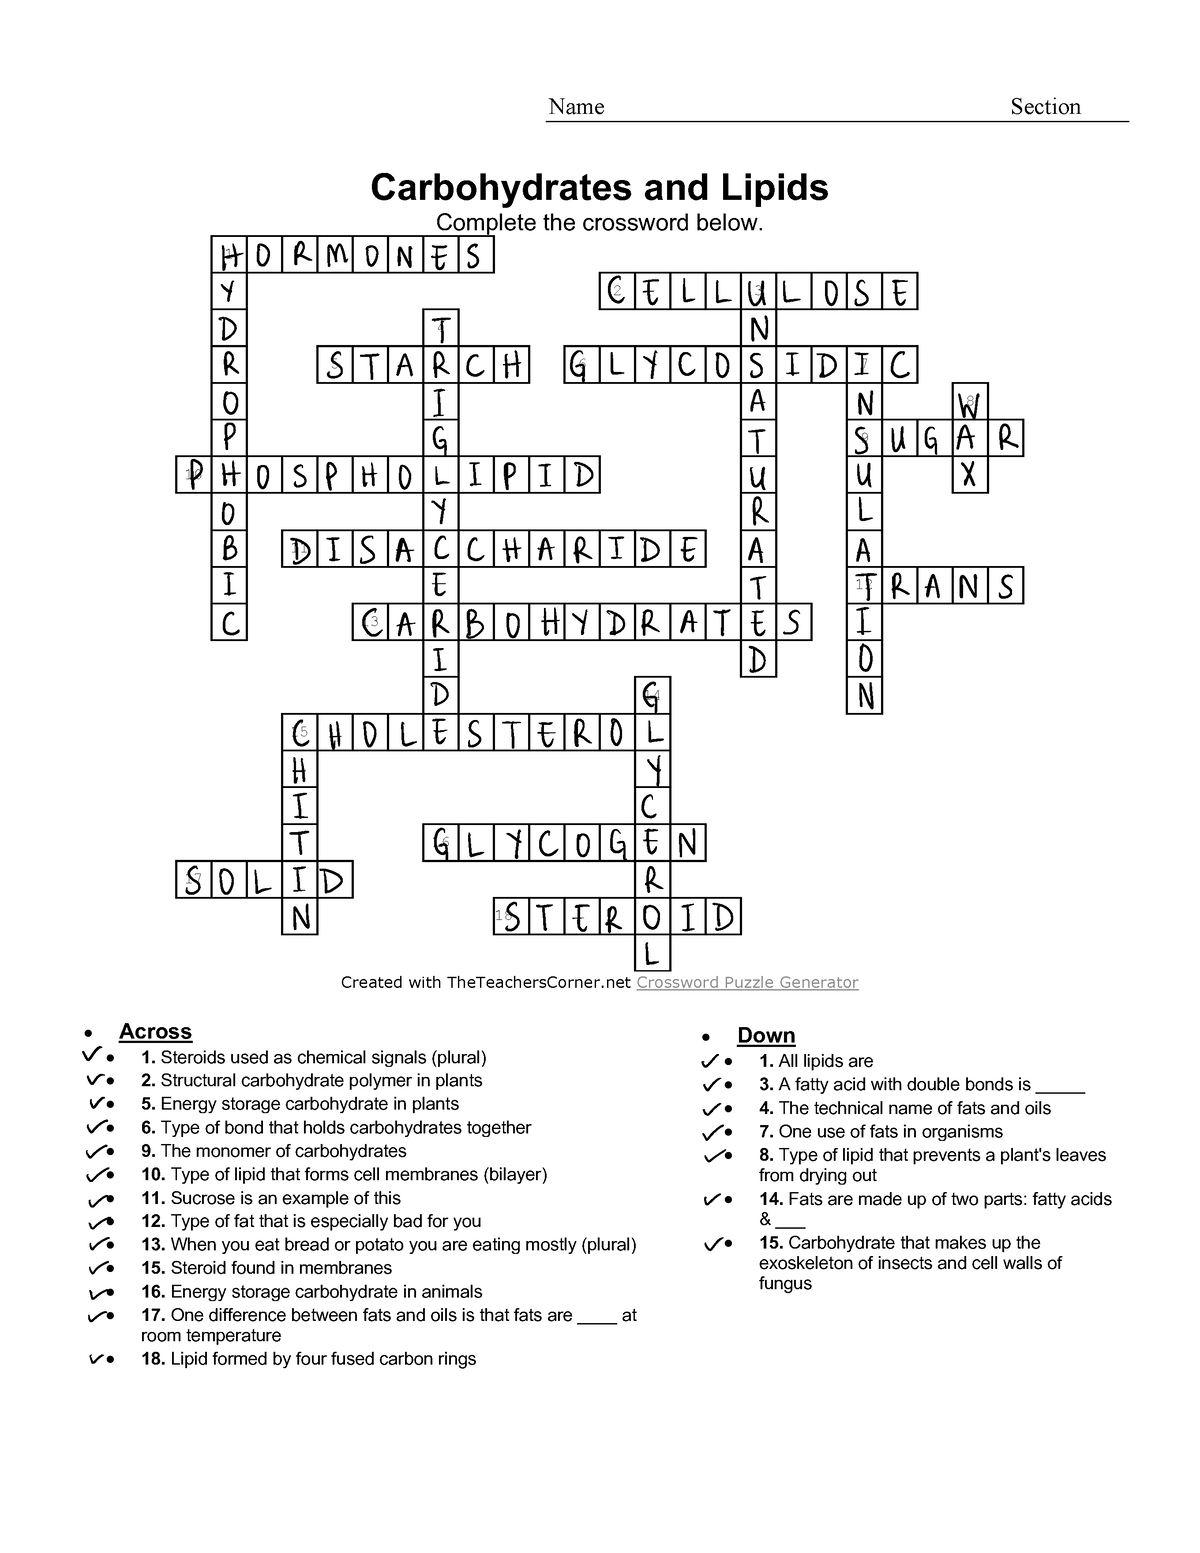 Crossword single Name Section Carbohydrates and Lipids Complete the